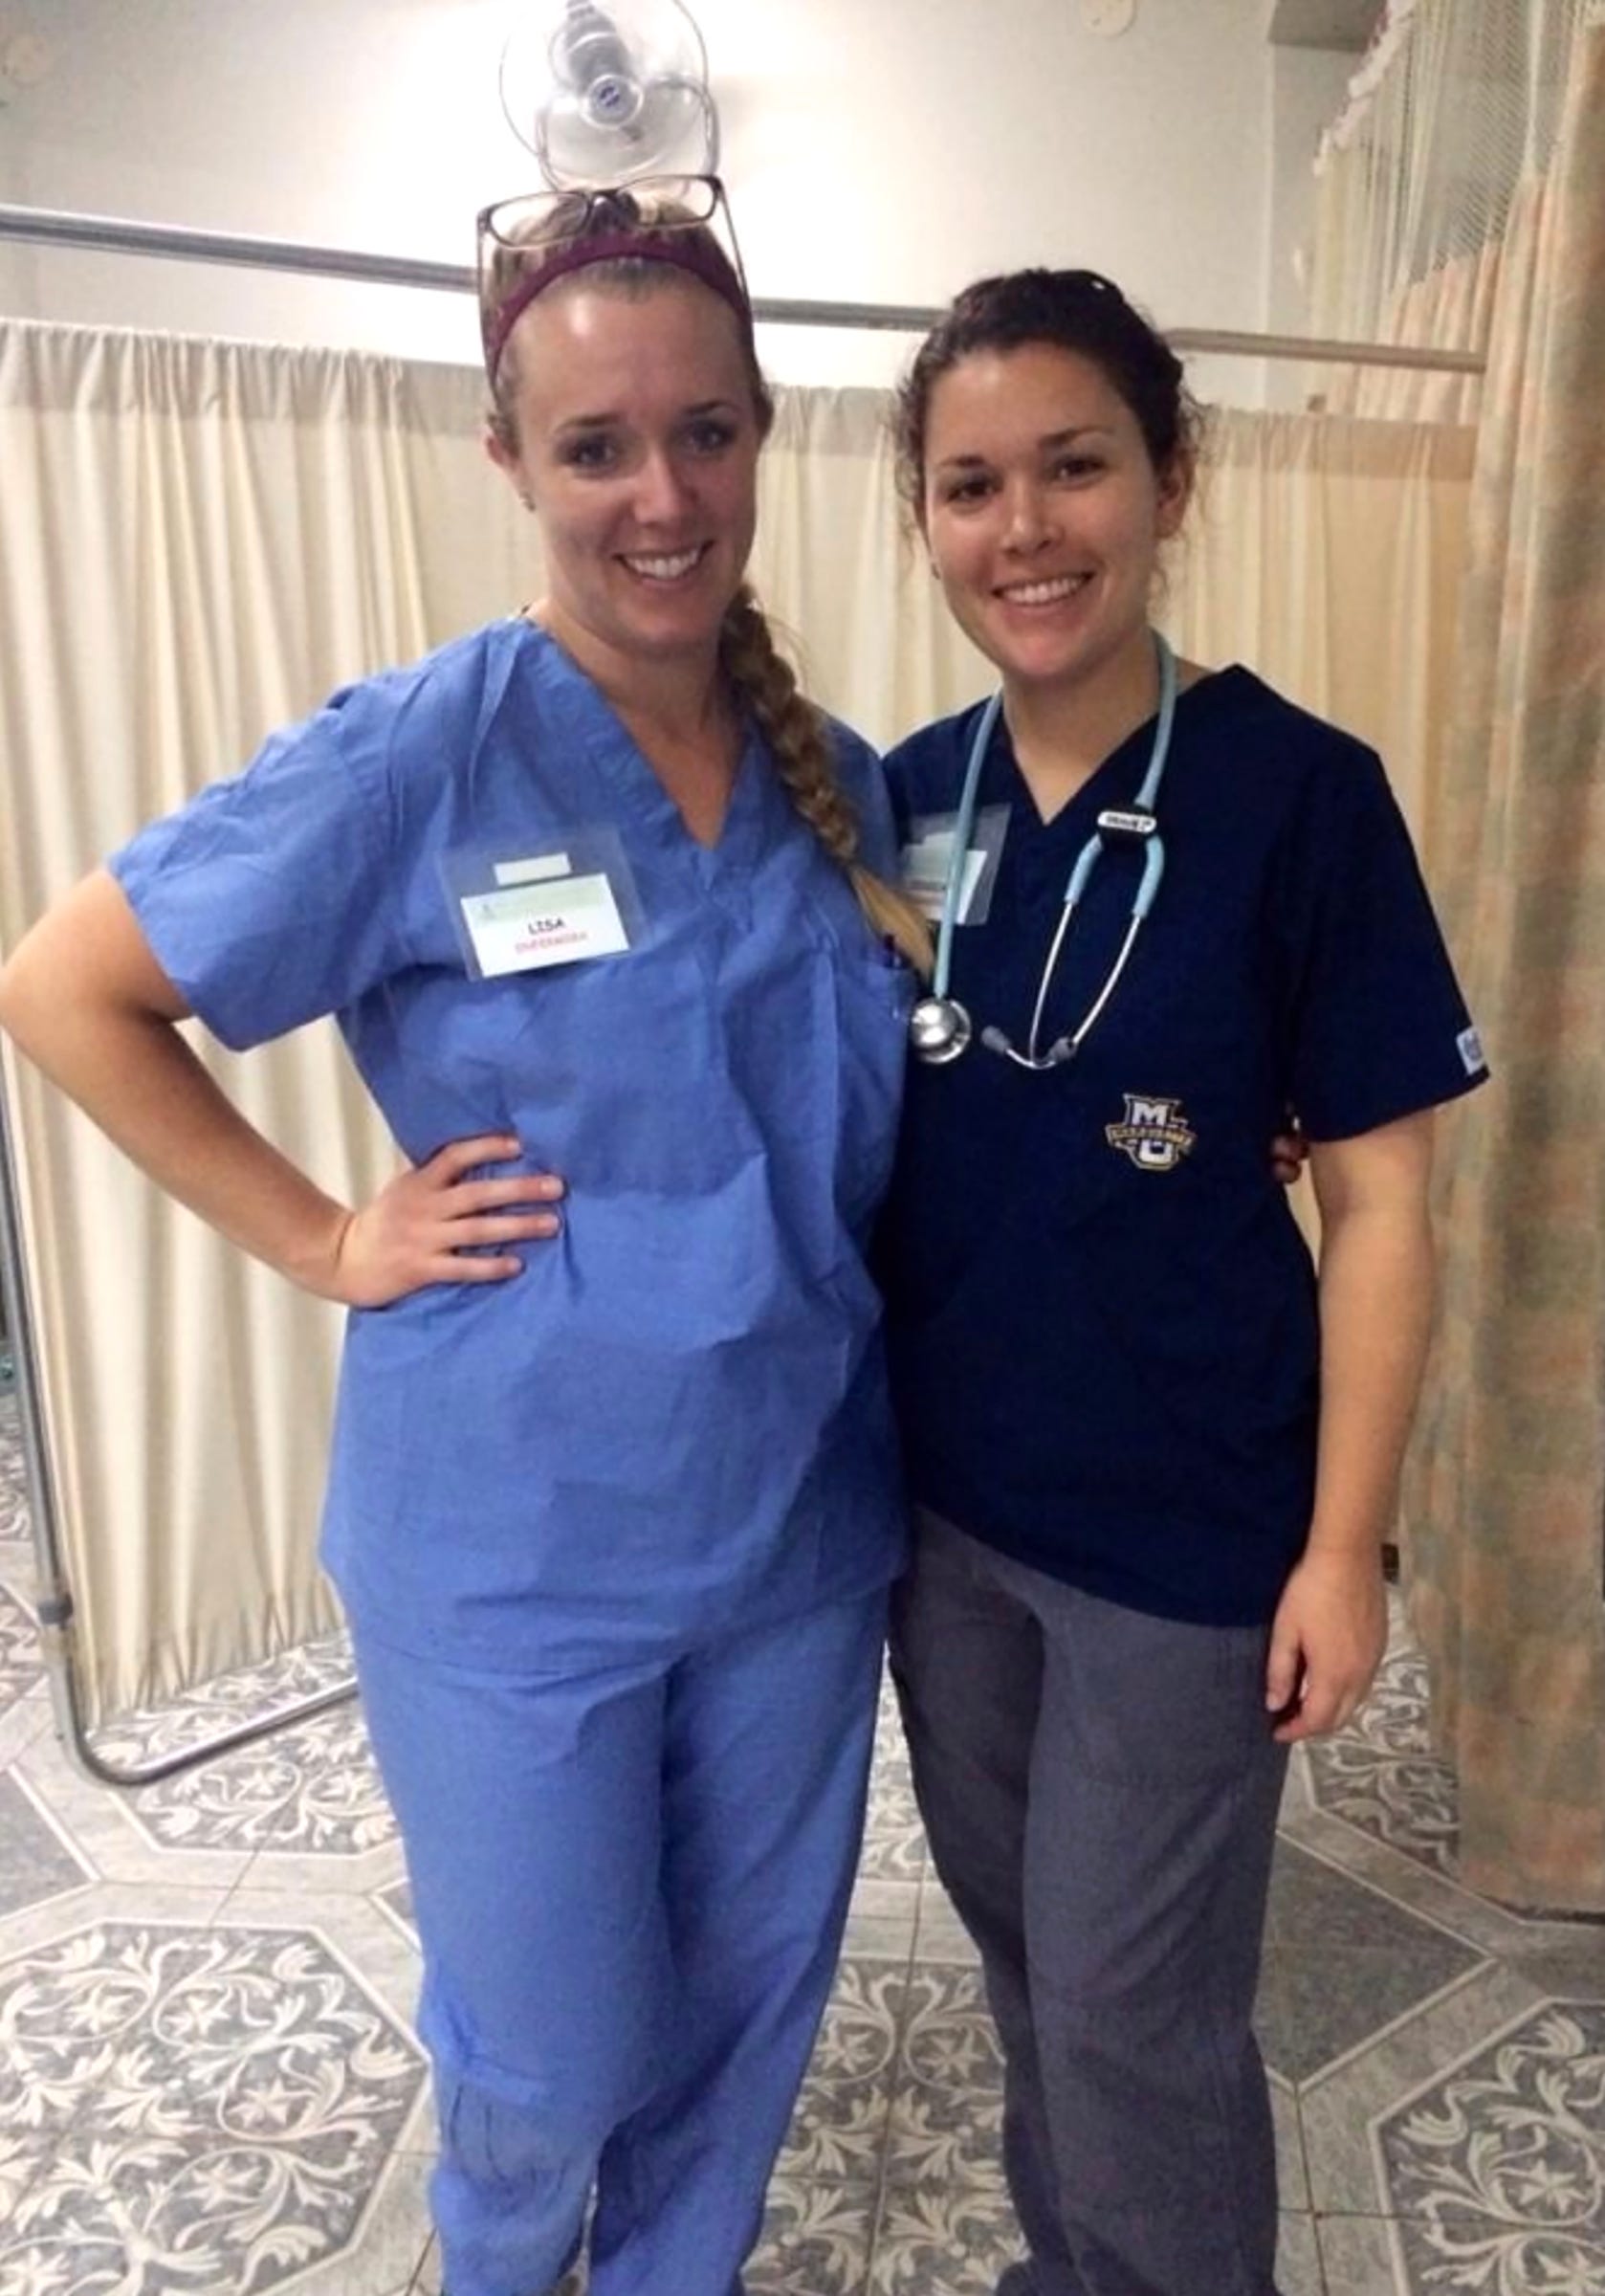 Nurses Jessica Rosing, right, and Lisa Mader in 2016, weeks before Rosing was attacked by a patient at St. Luke's Medical Center.